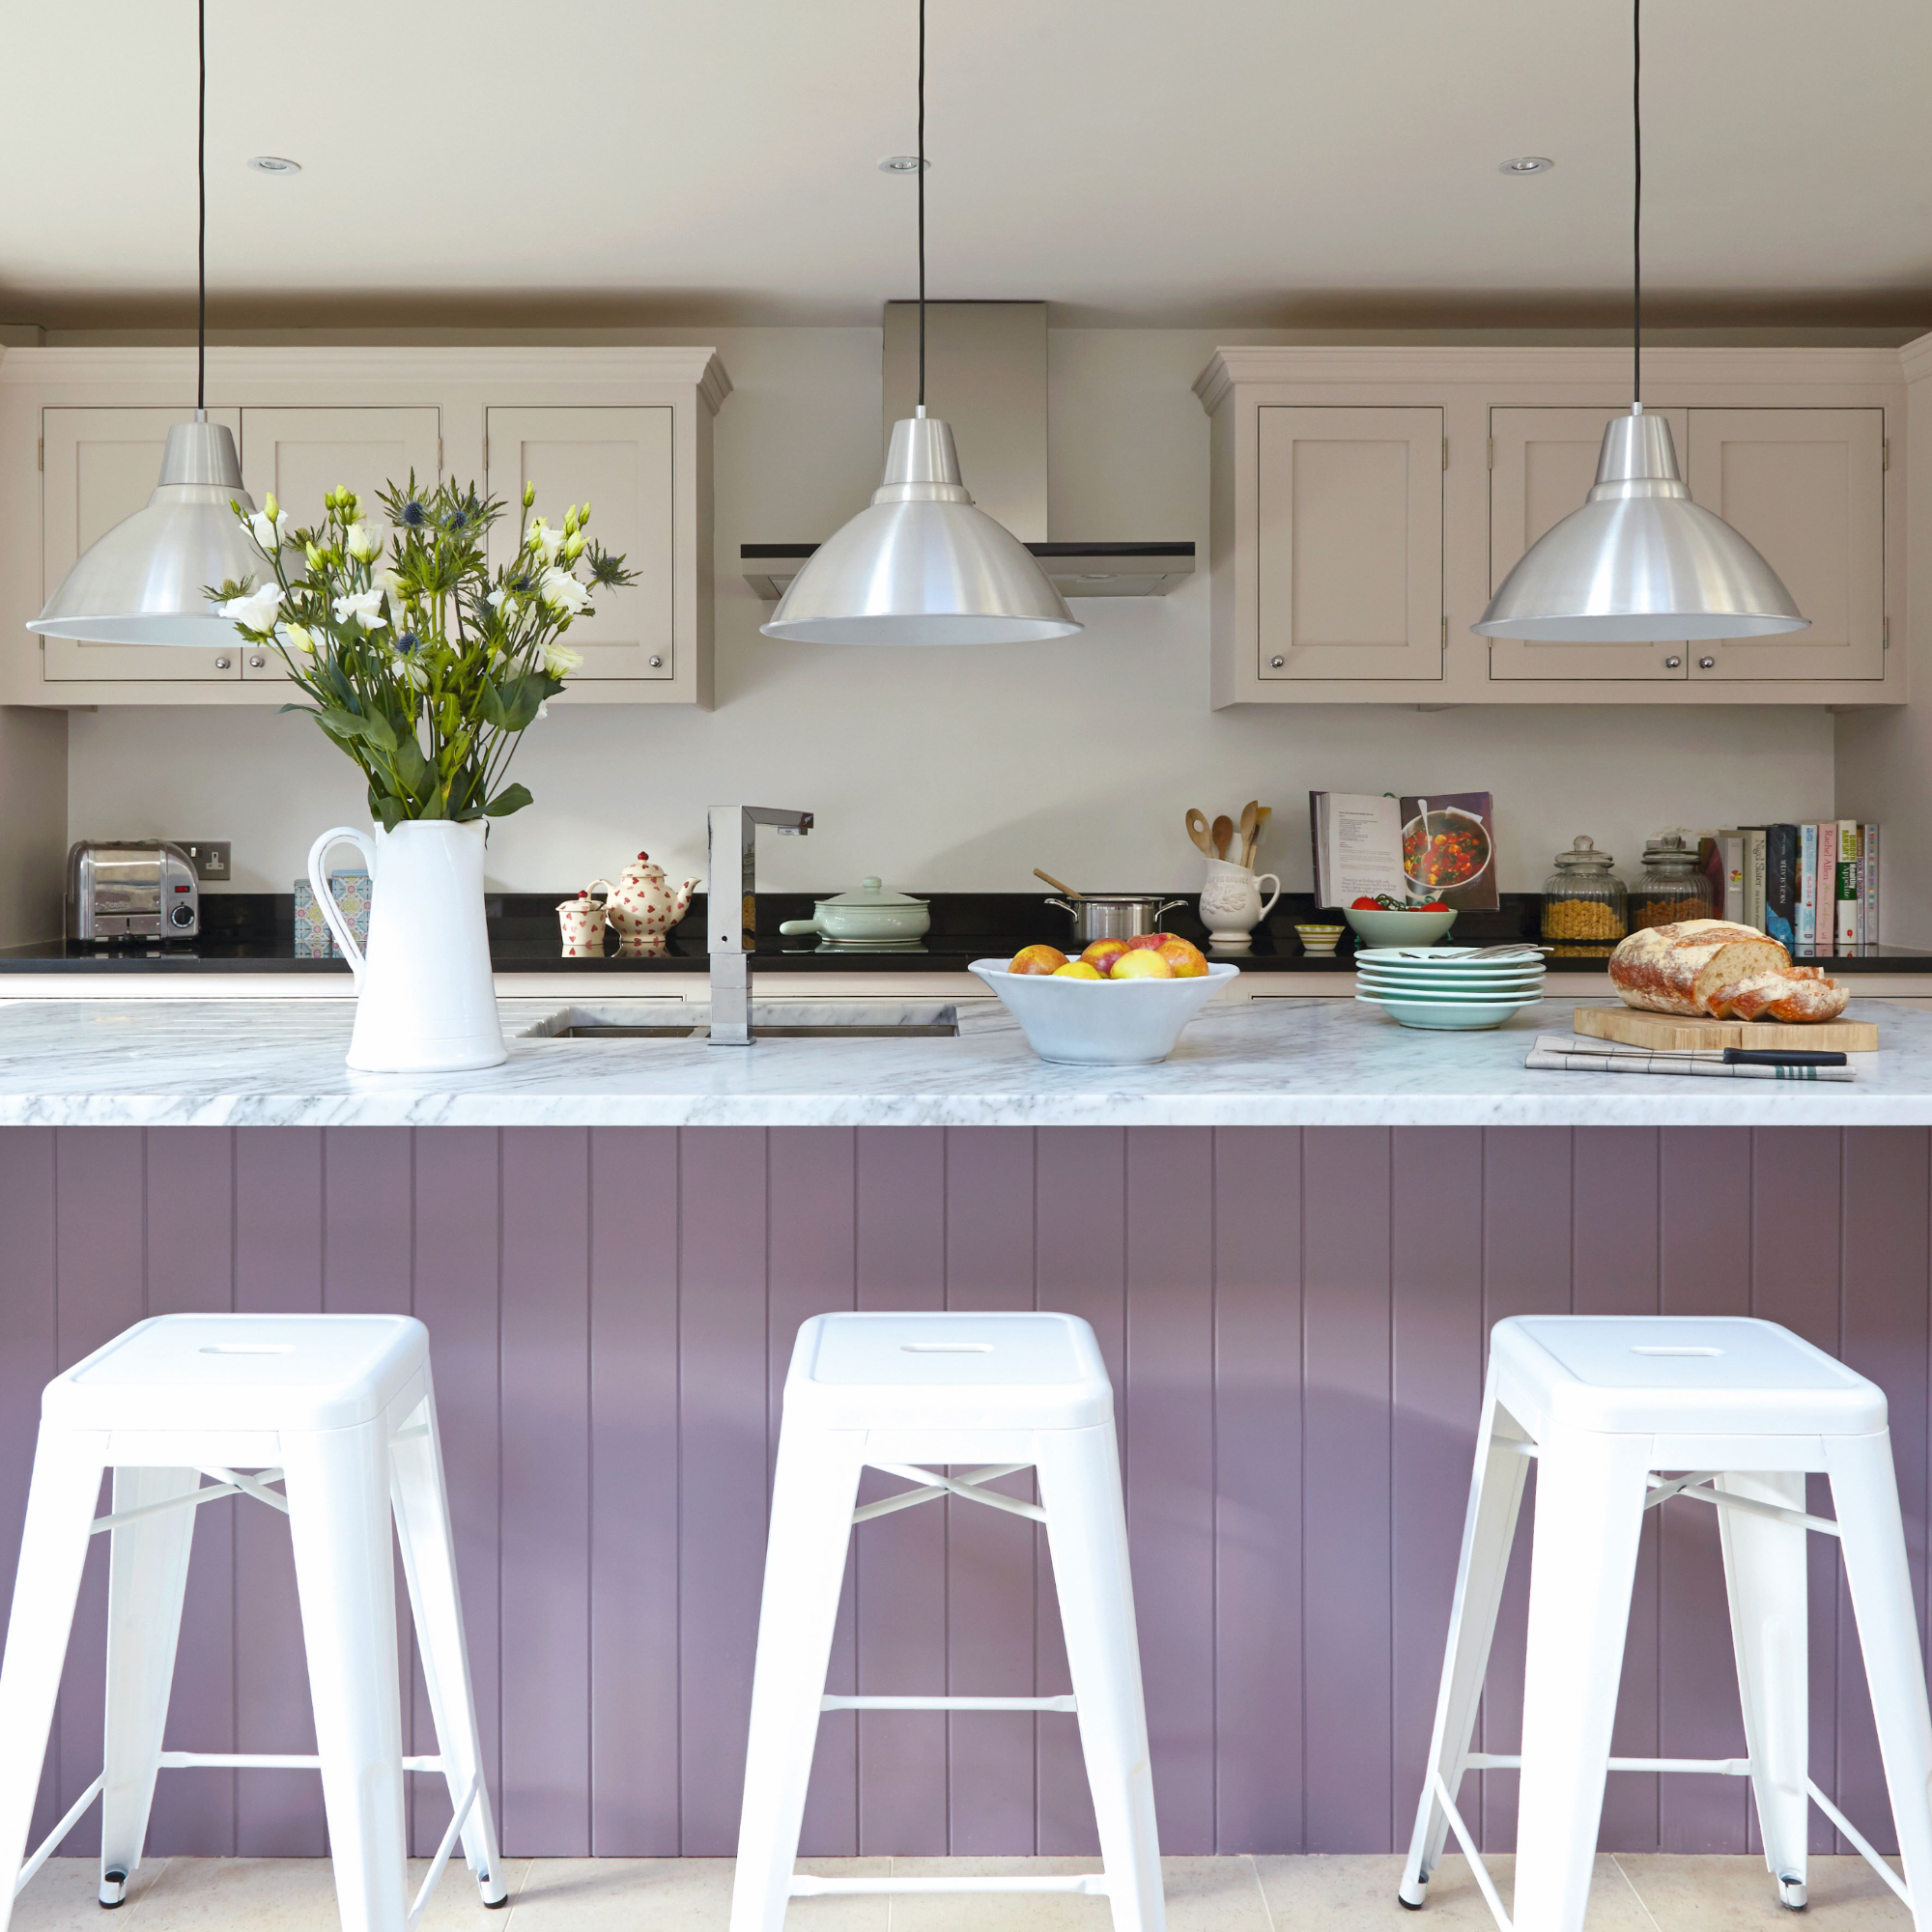 Modern hwite kitchen, large lilac breakfast bar with high bar stools, low hanging pendant lights